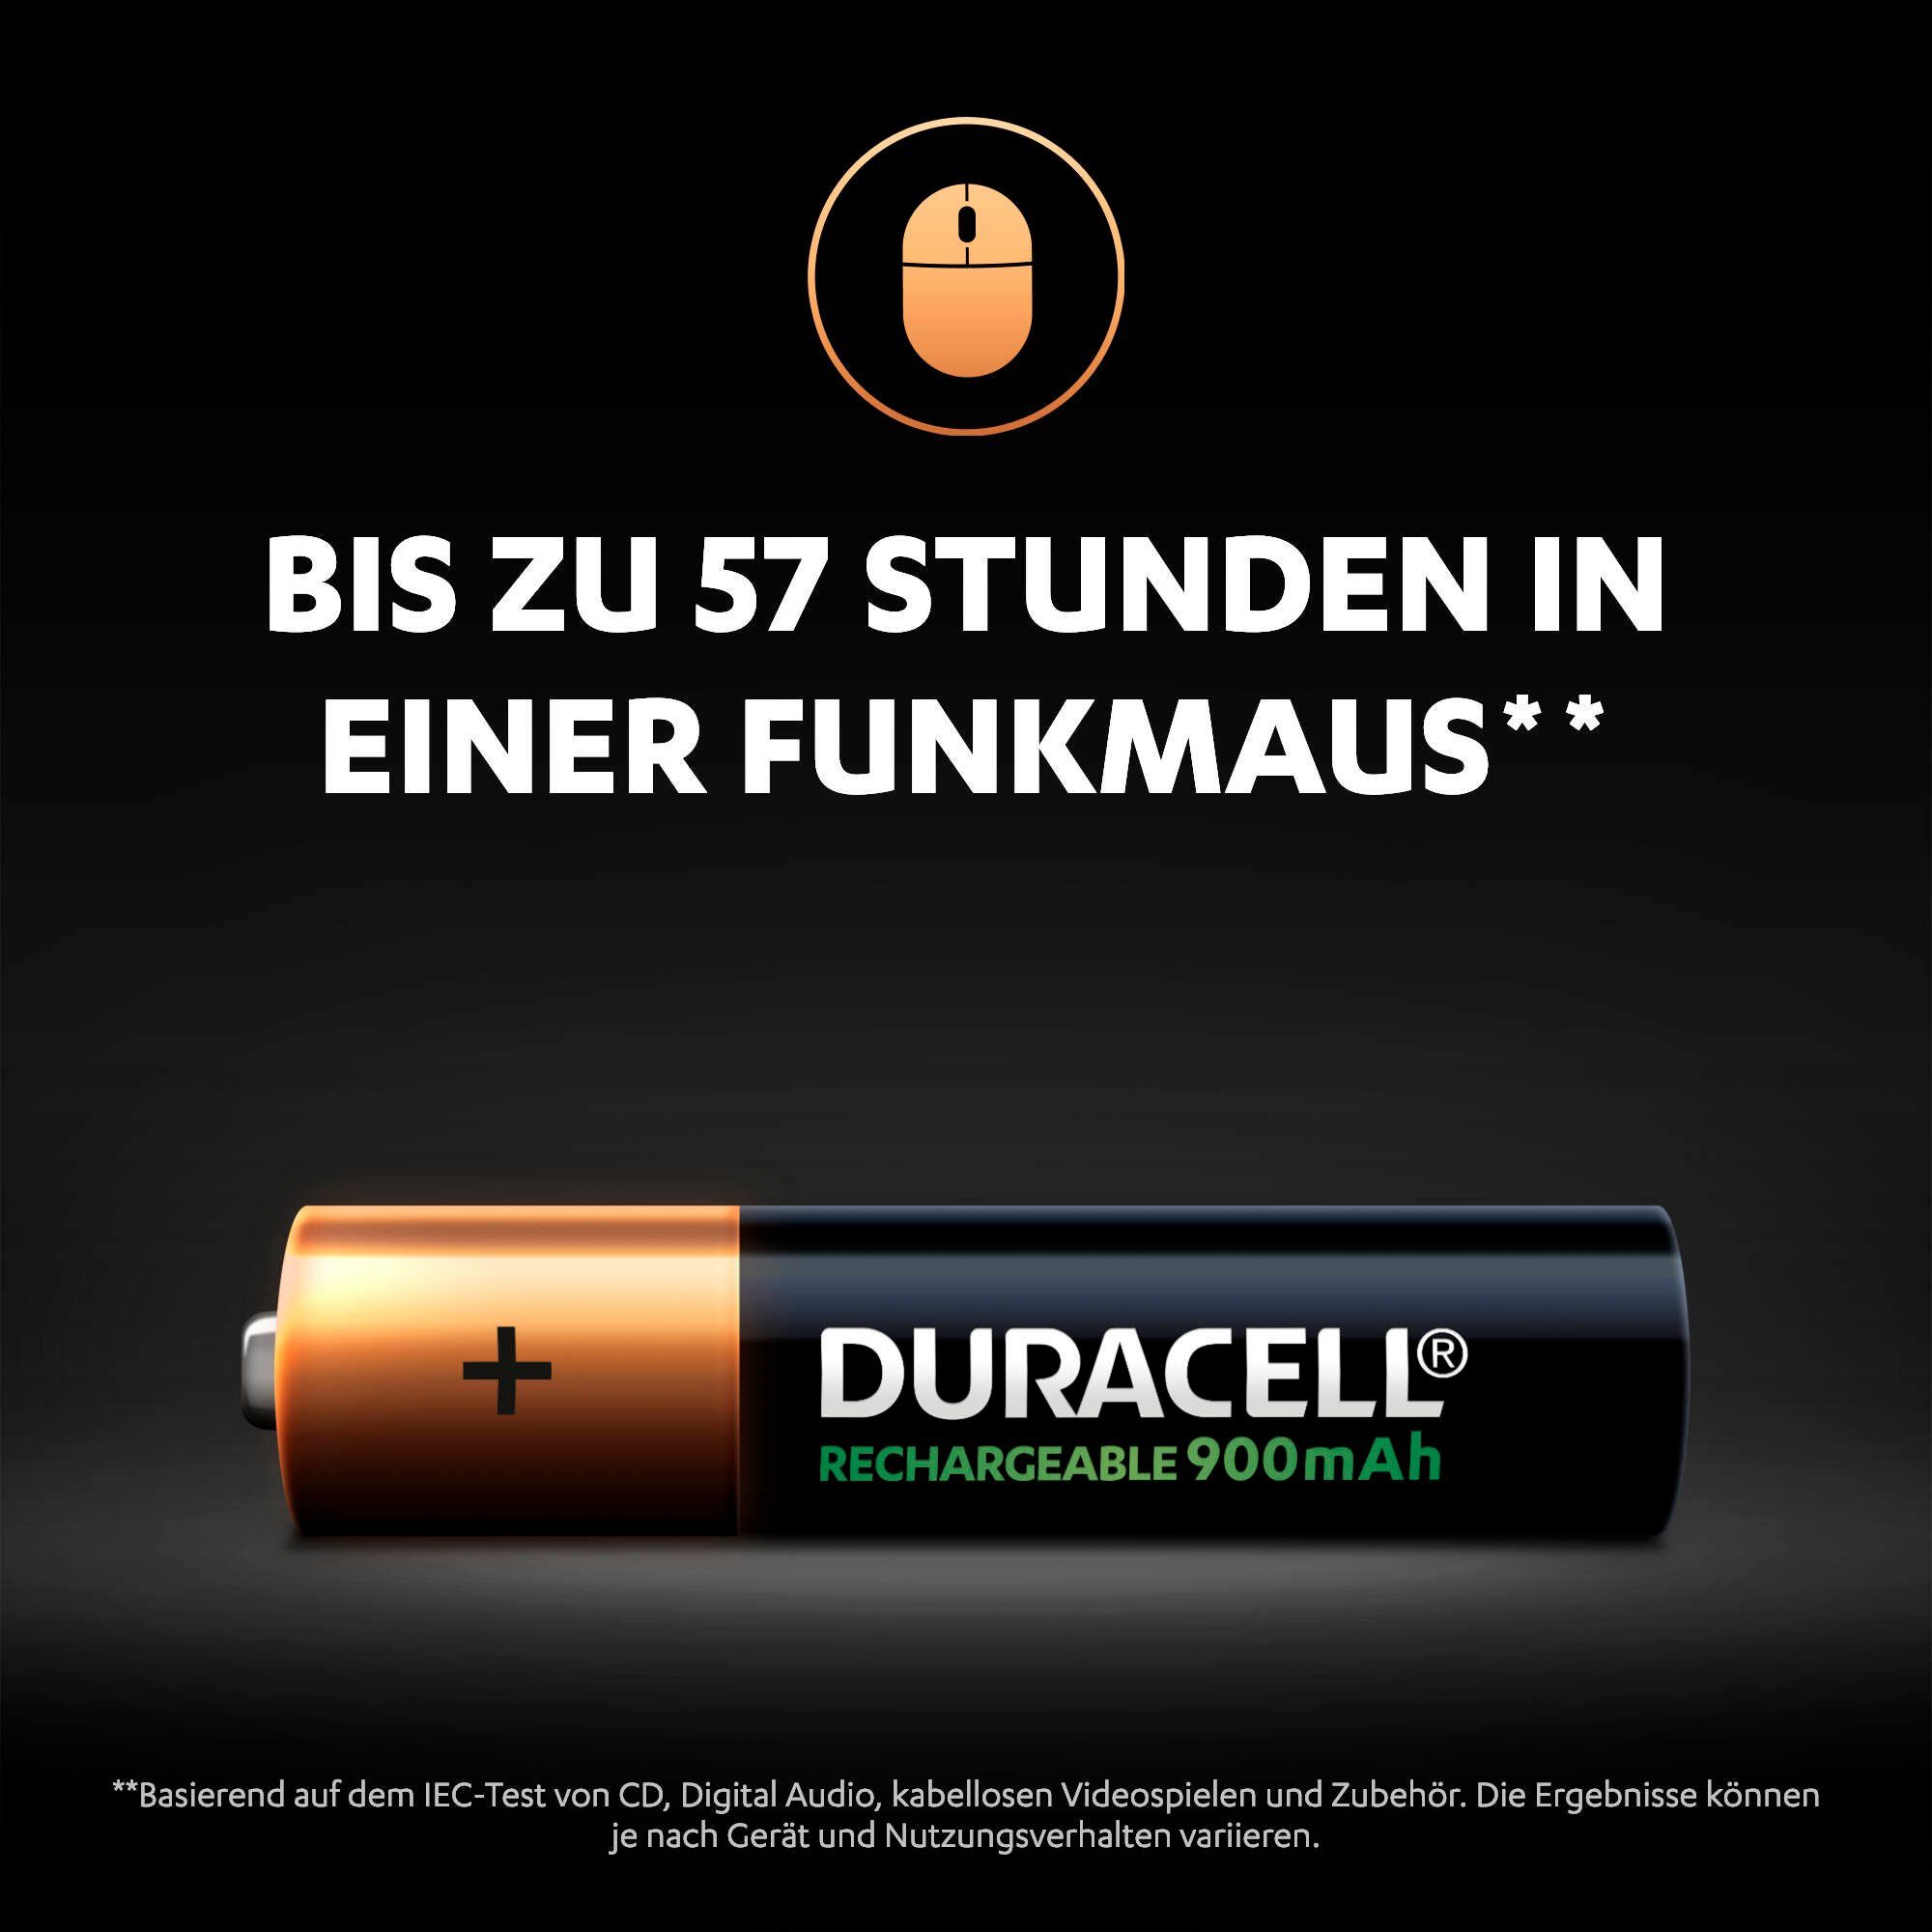 4er Rechargeable AAA Duracell Batterie, Pack 900mAh St) (4